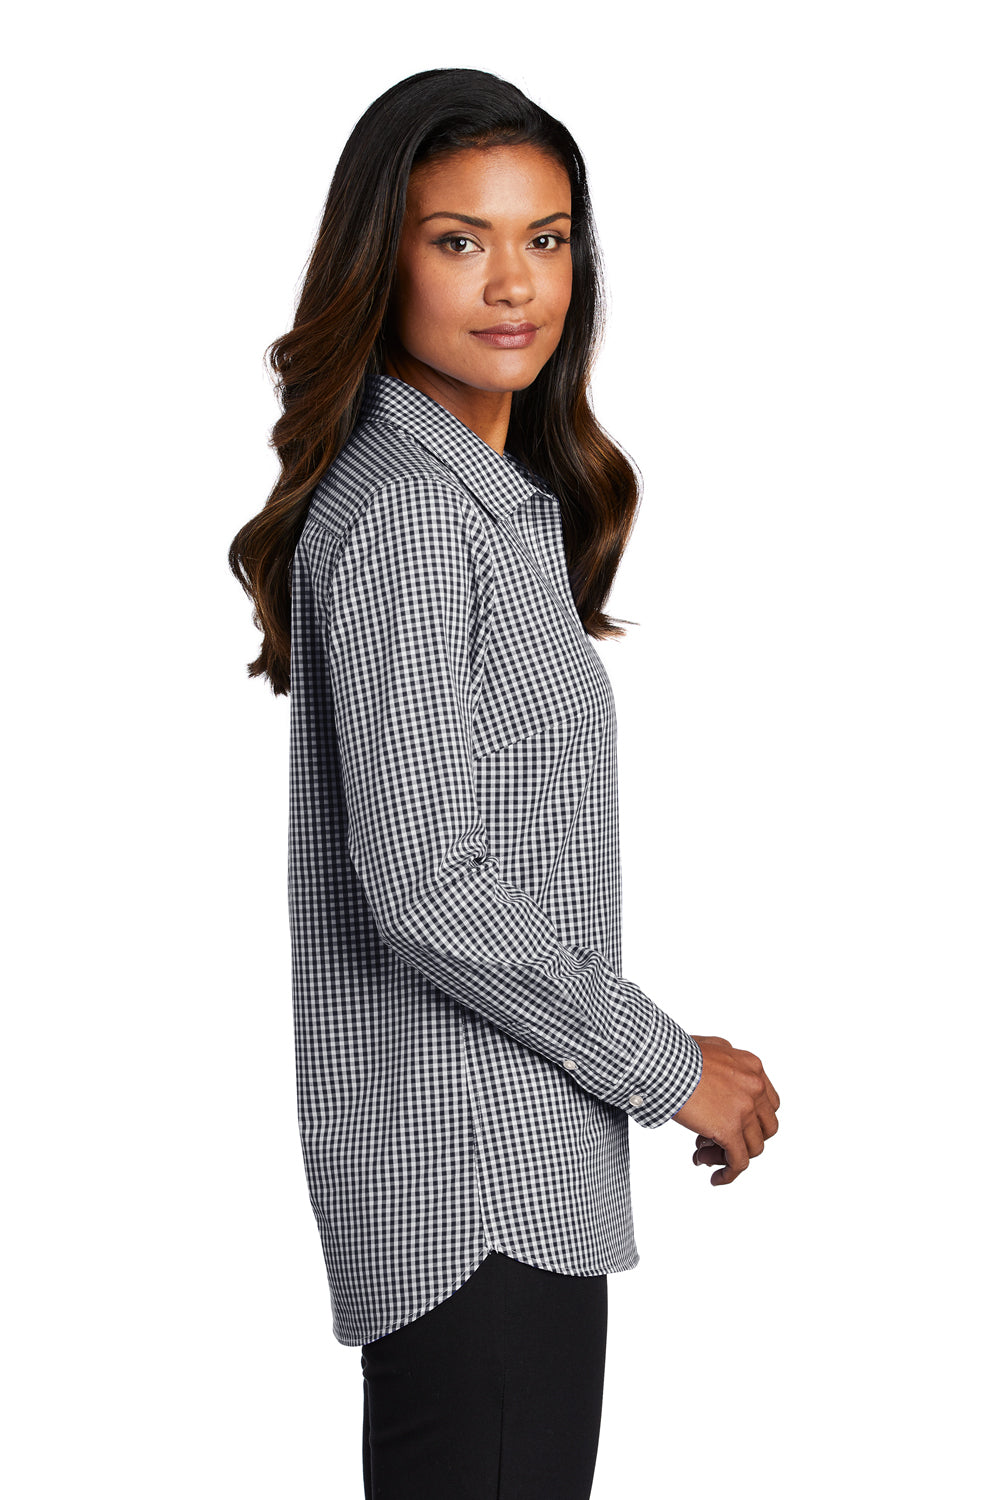 Port Authority Womens Broadcloth Gingham Long Sleeve Button Down Shirt Black/White Side